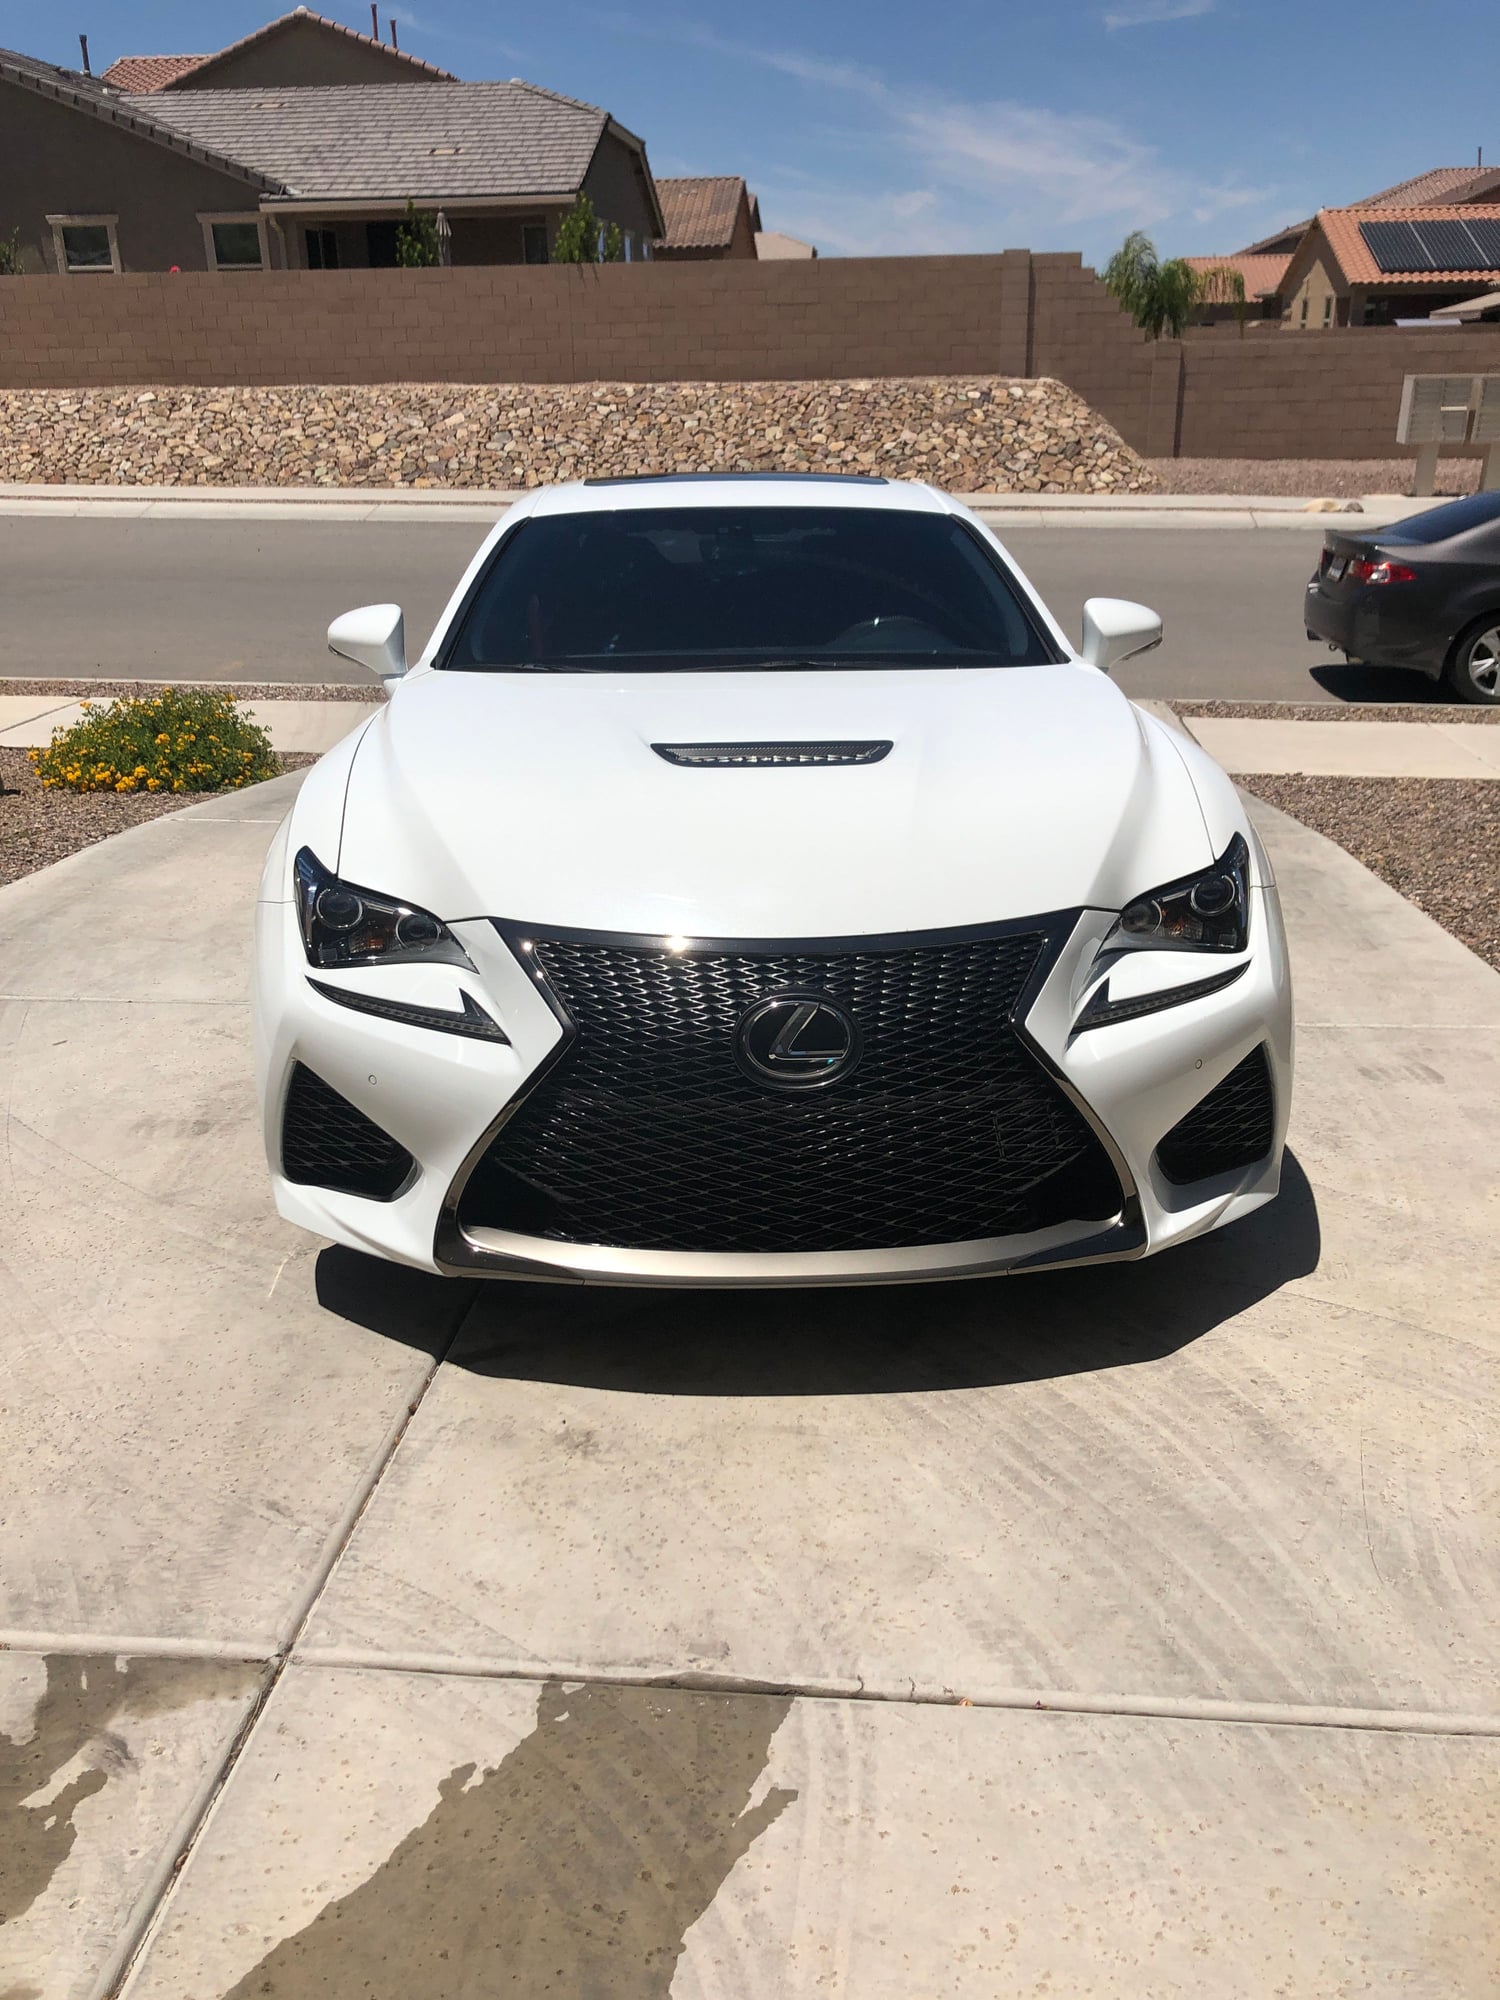 2016 Lexus RC F - 2016 Lexus RC F Ultra White - Used - VIN JTHHP5BC9G5004837 - 19,500 Miles - 8 cyl - 2WD - Automatic - Coupe - White - Tucson, AZ 85747, United States